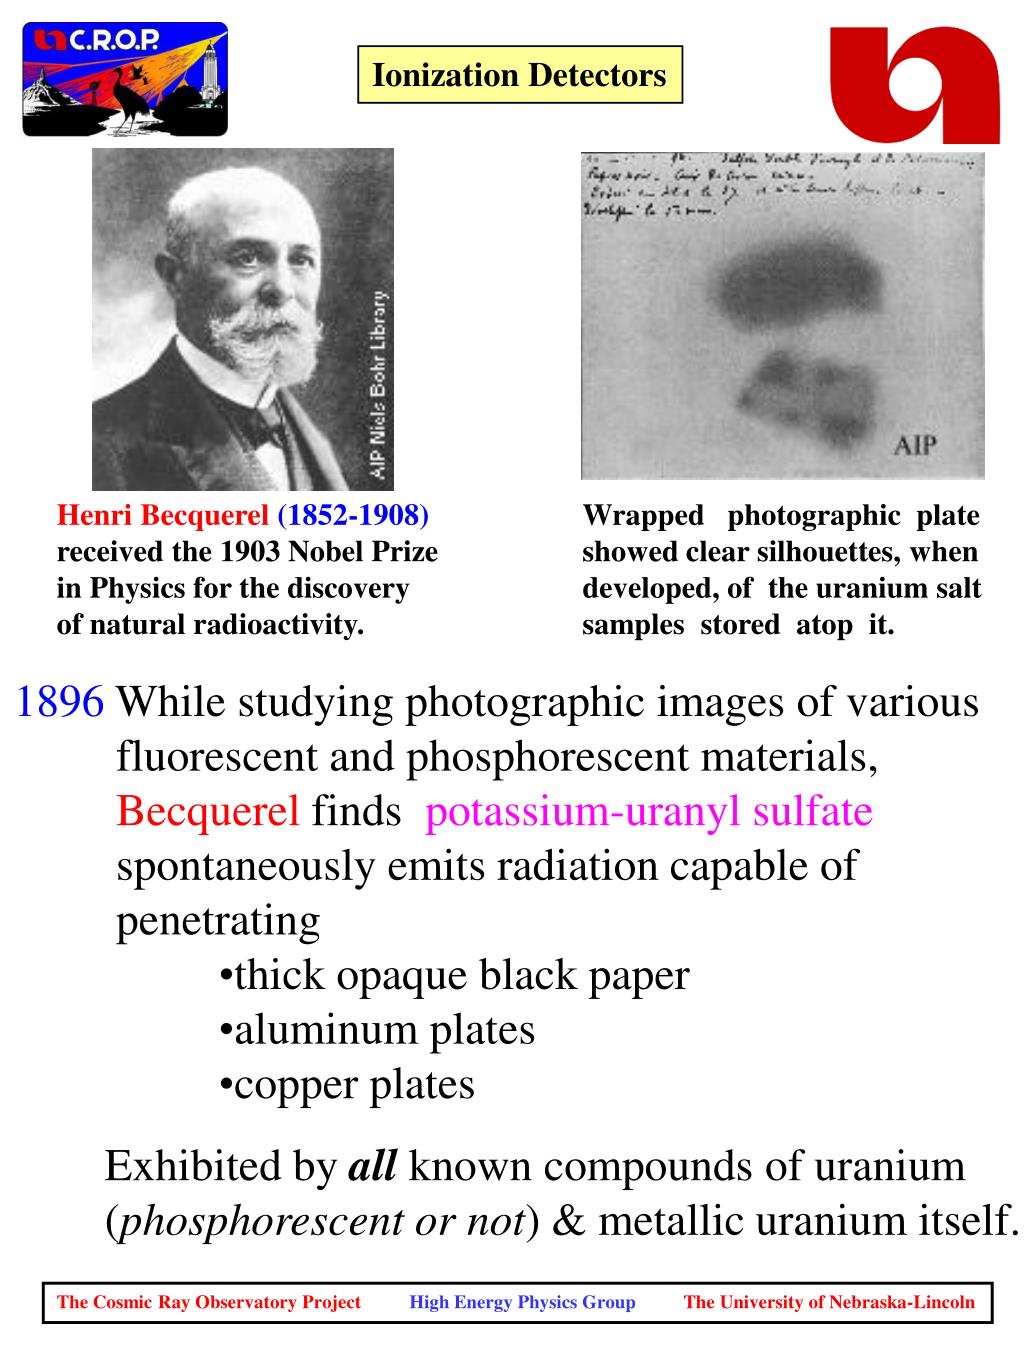 PPT - Henri Becquerel (1852-1908) received the 1903 Nobel Prize in Physics for the discovery of natural radioactivity. PowerPoint Presentation - ID:734233